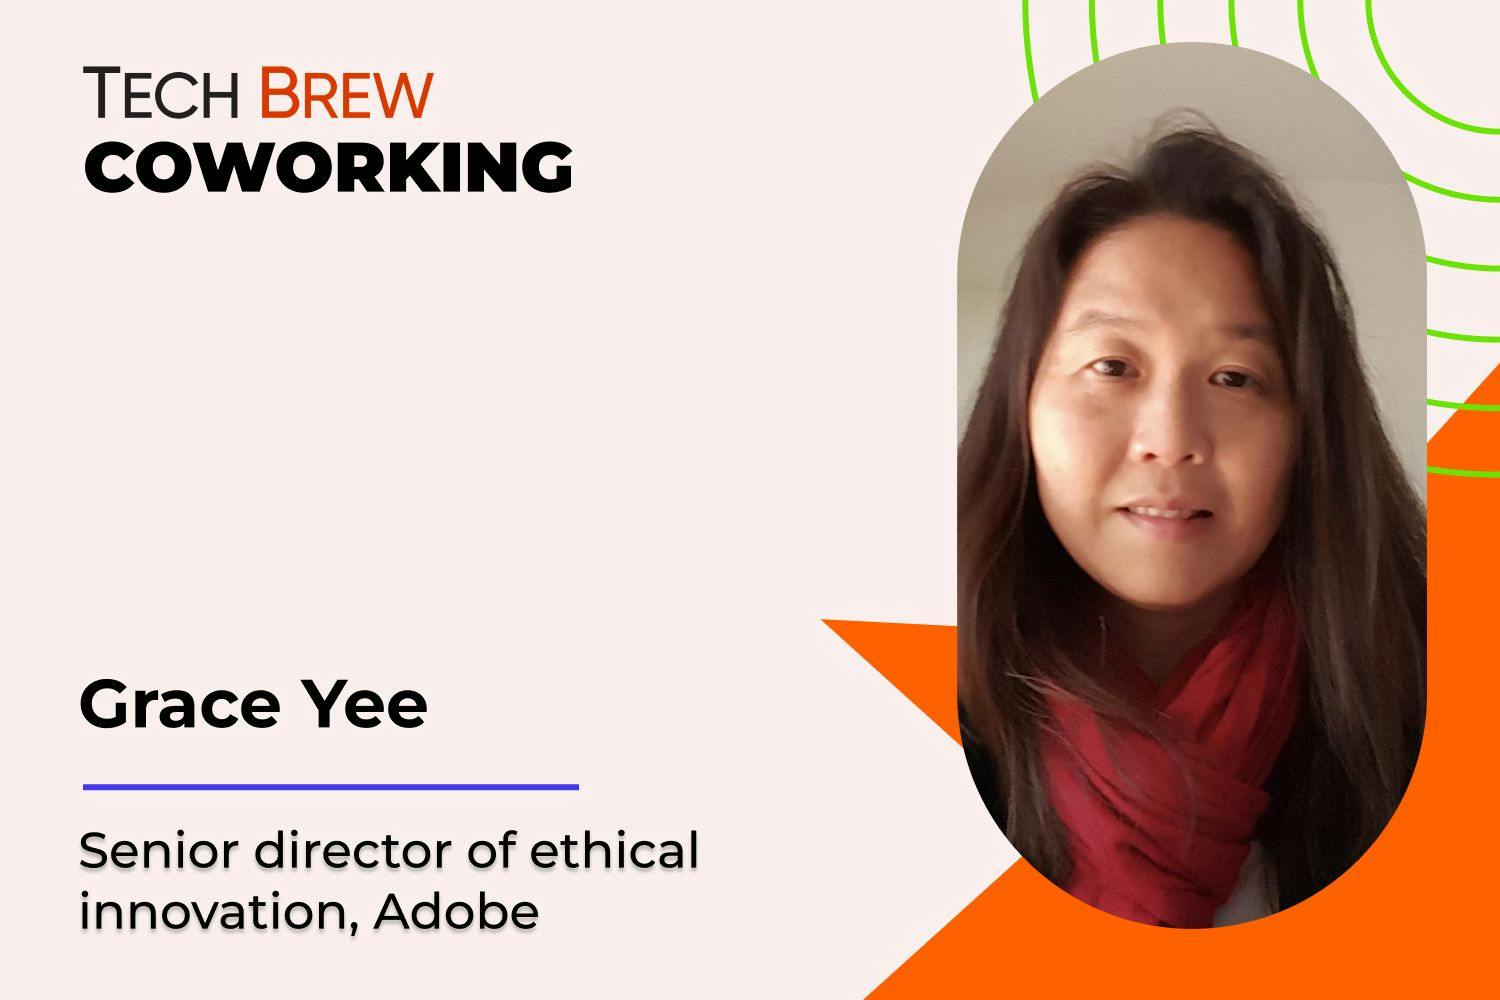 Graphic featuring a headshot of Adobe's Grace Yee